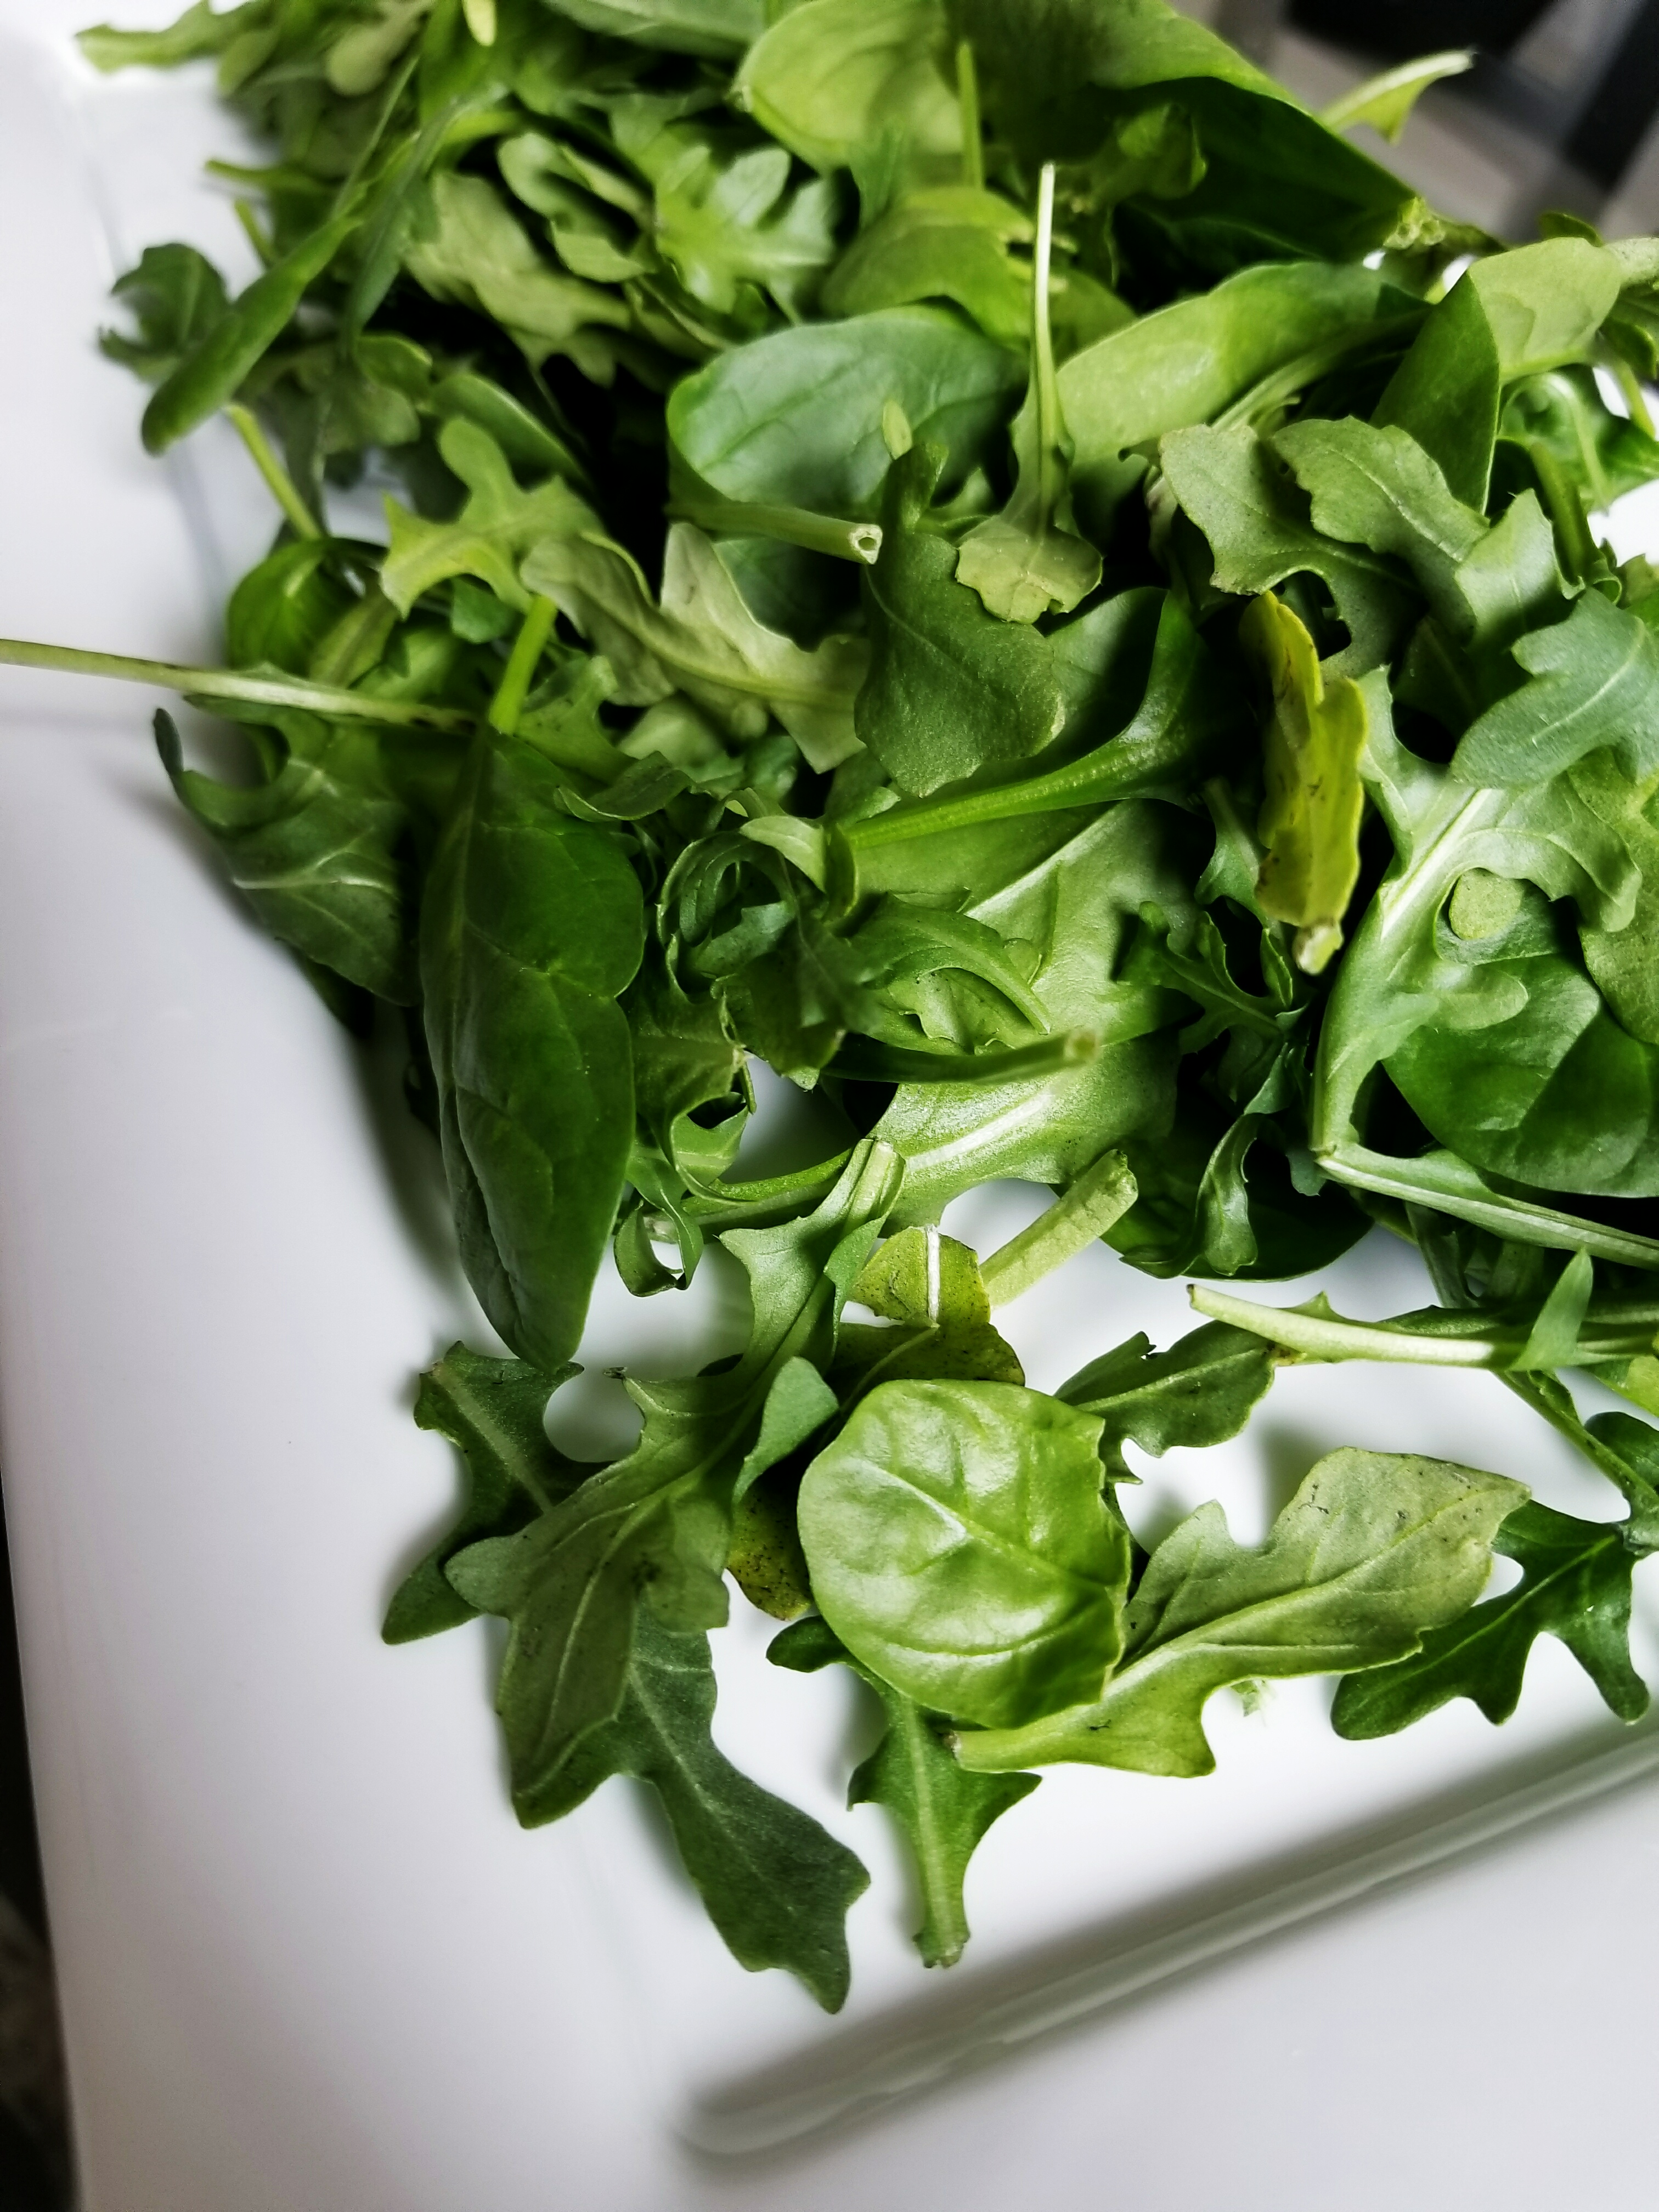 Choosing the best greens for your salad